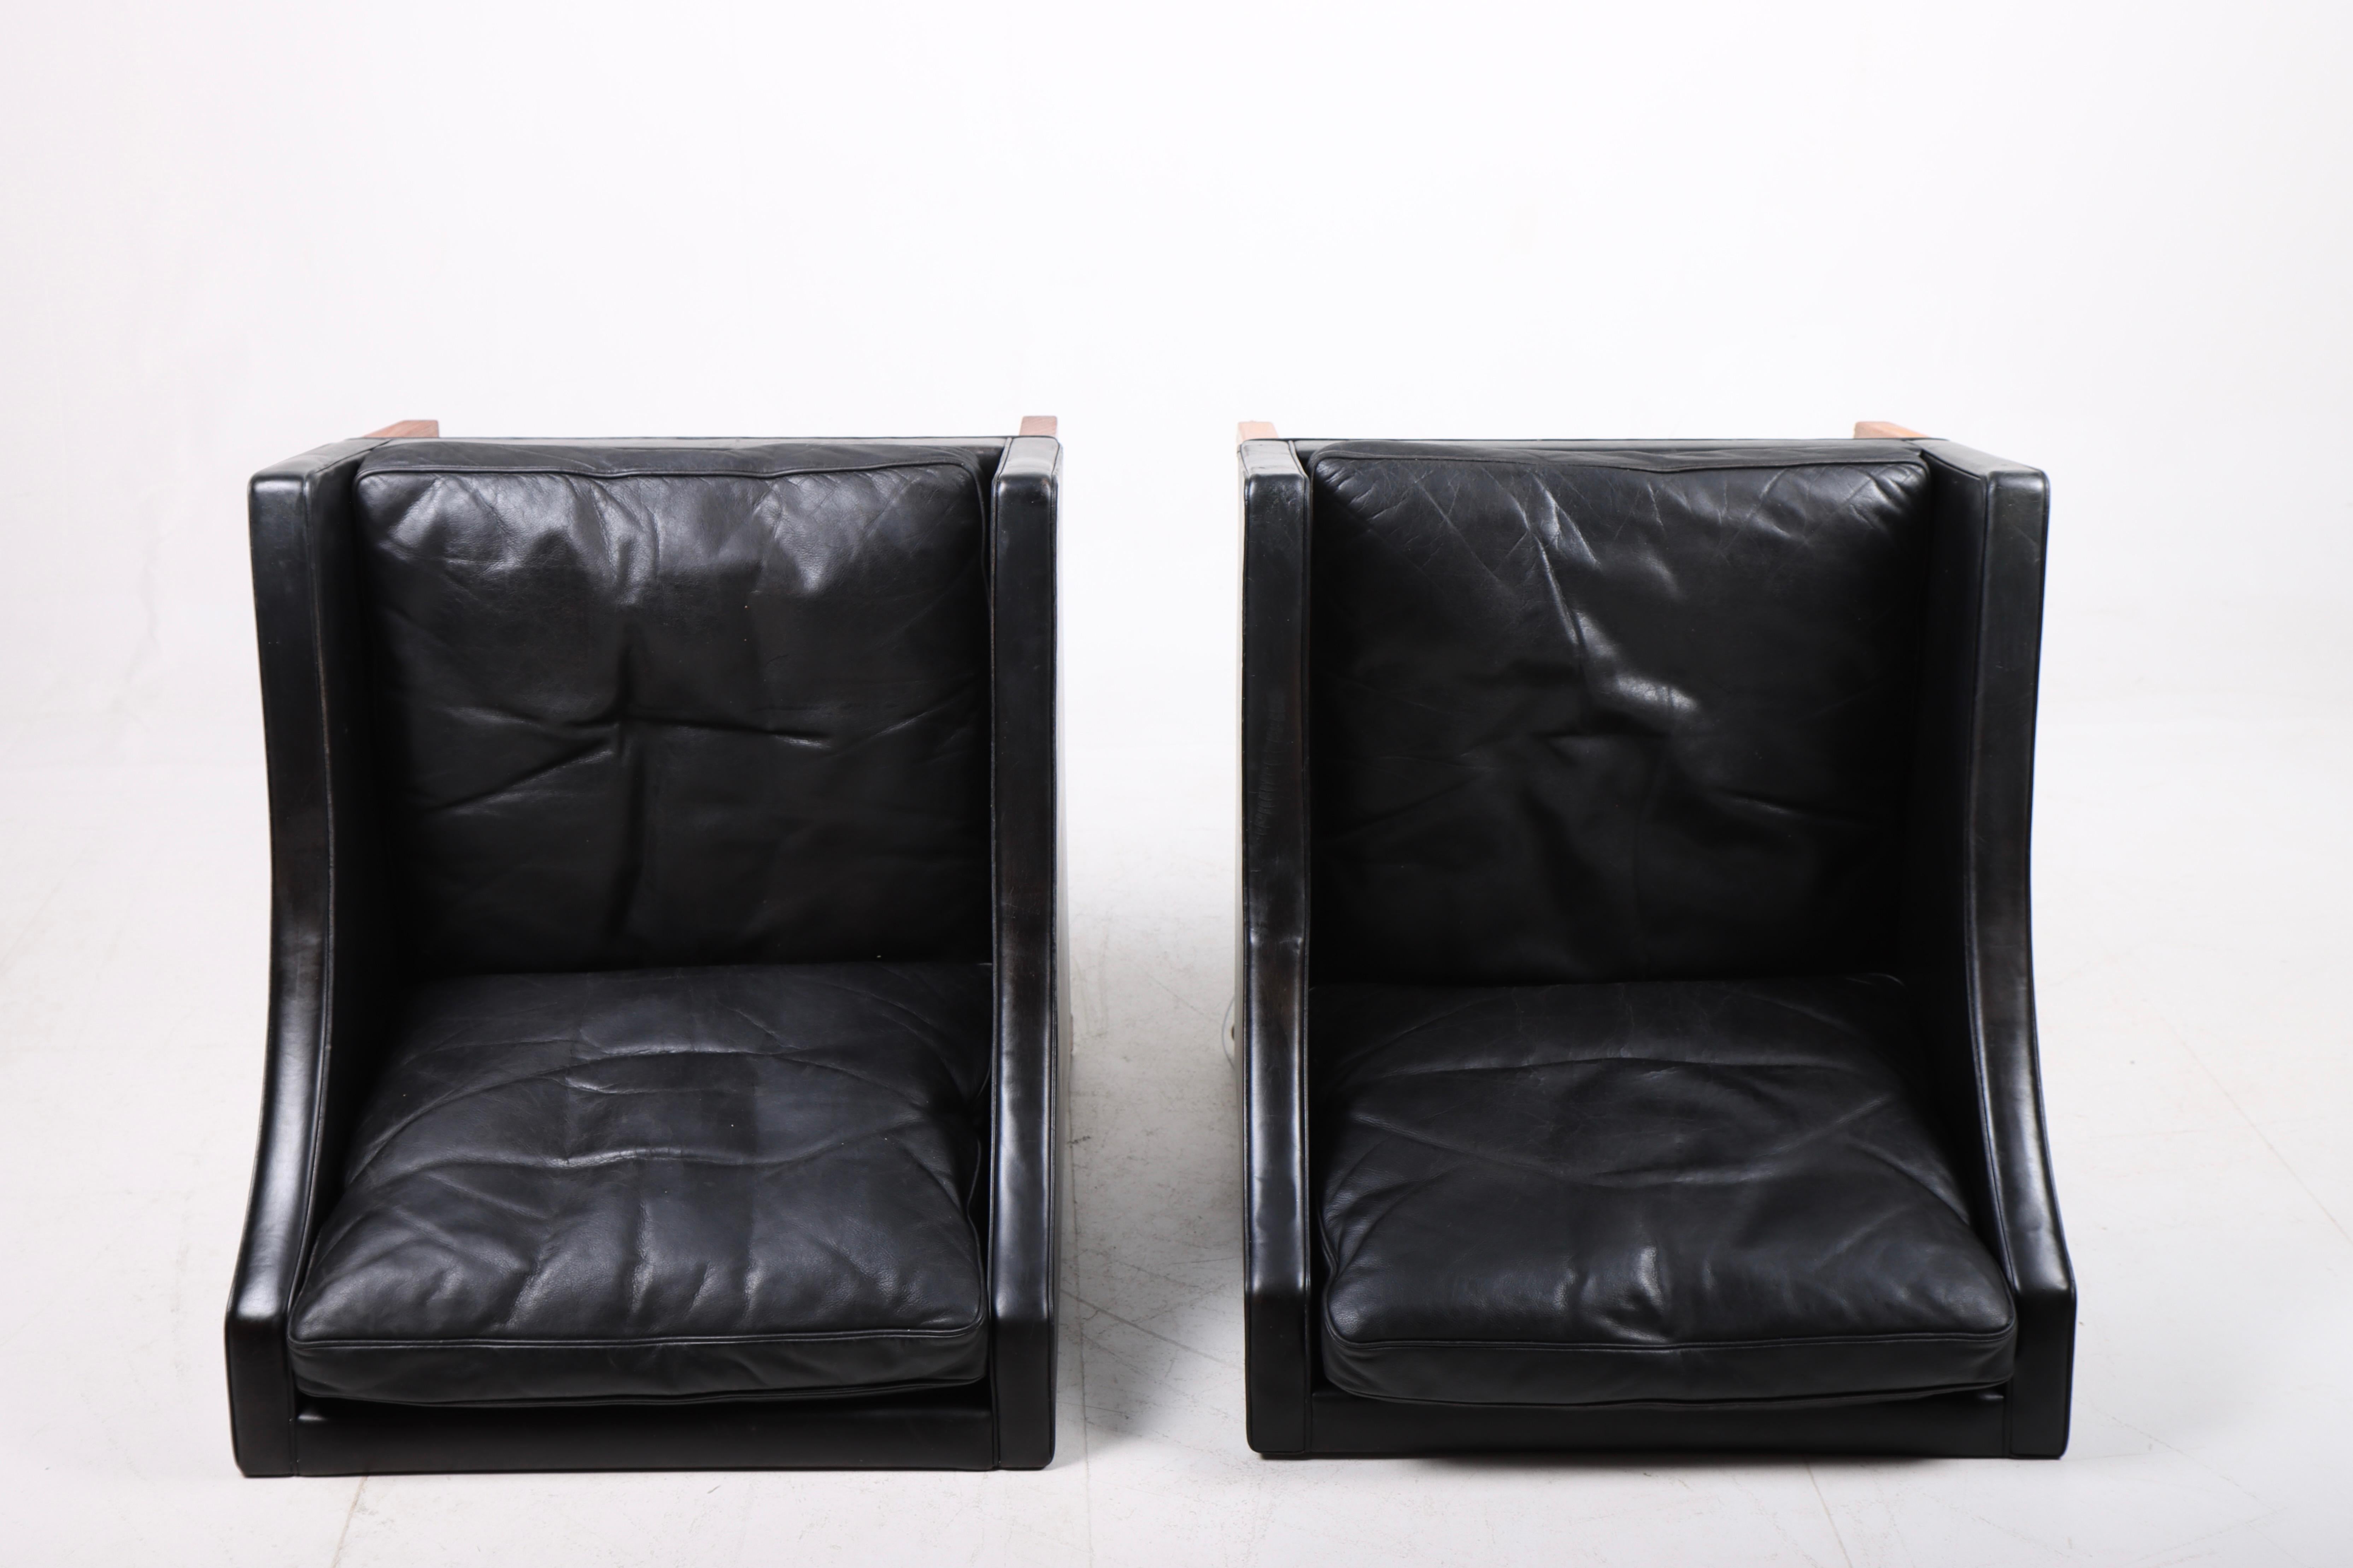 Pair of Danish Midcentury Lounge Chairs in Patinated Leather by Børge Mogensen For Sale 3